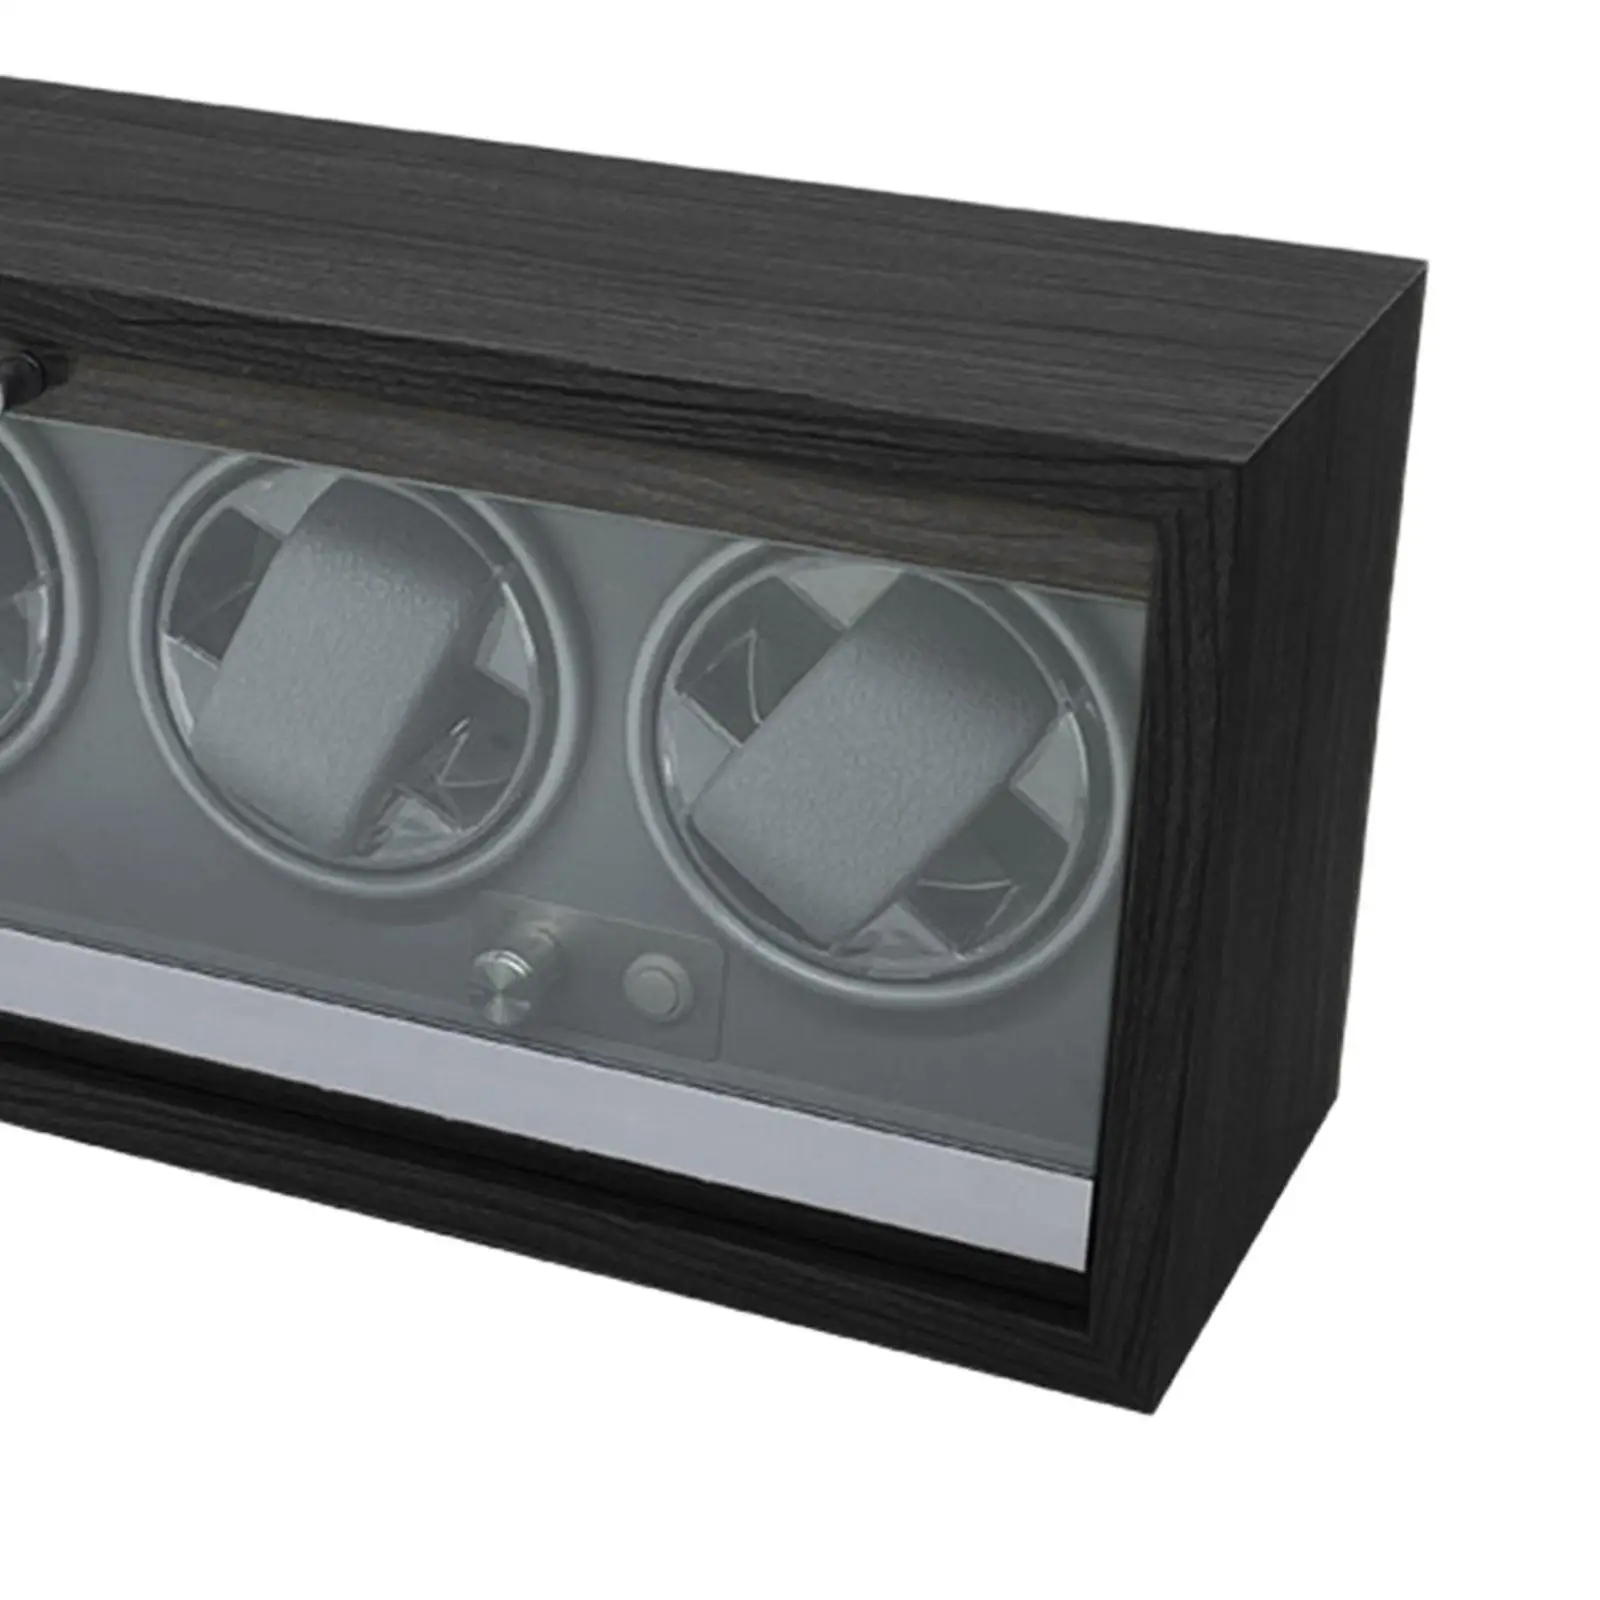 Watch Winder Box Luxury 4 Slots Quiet Motor with Ambient Light Electric Motor Boxes Wooden Watch Box for Mechanical Watches